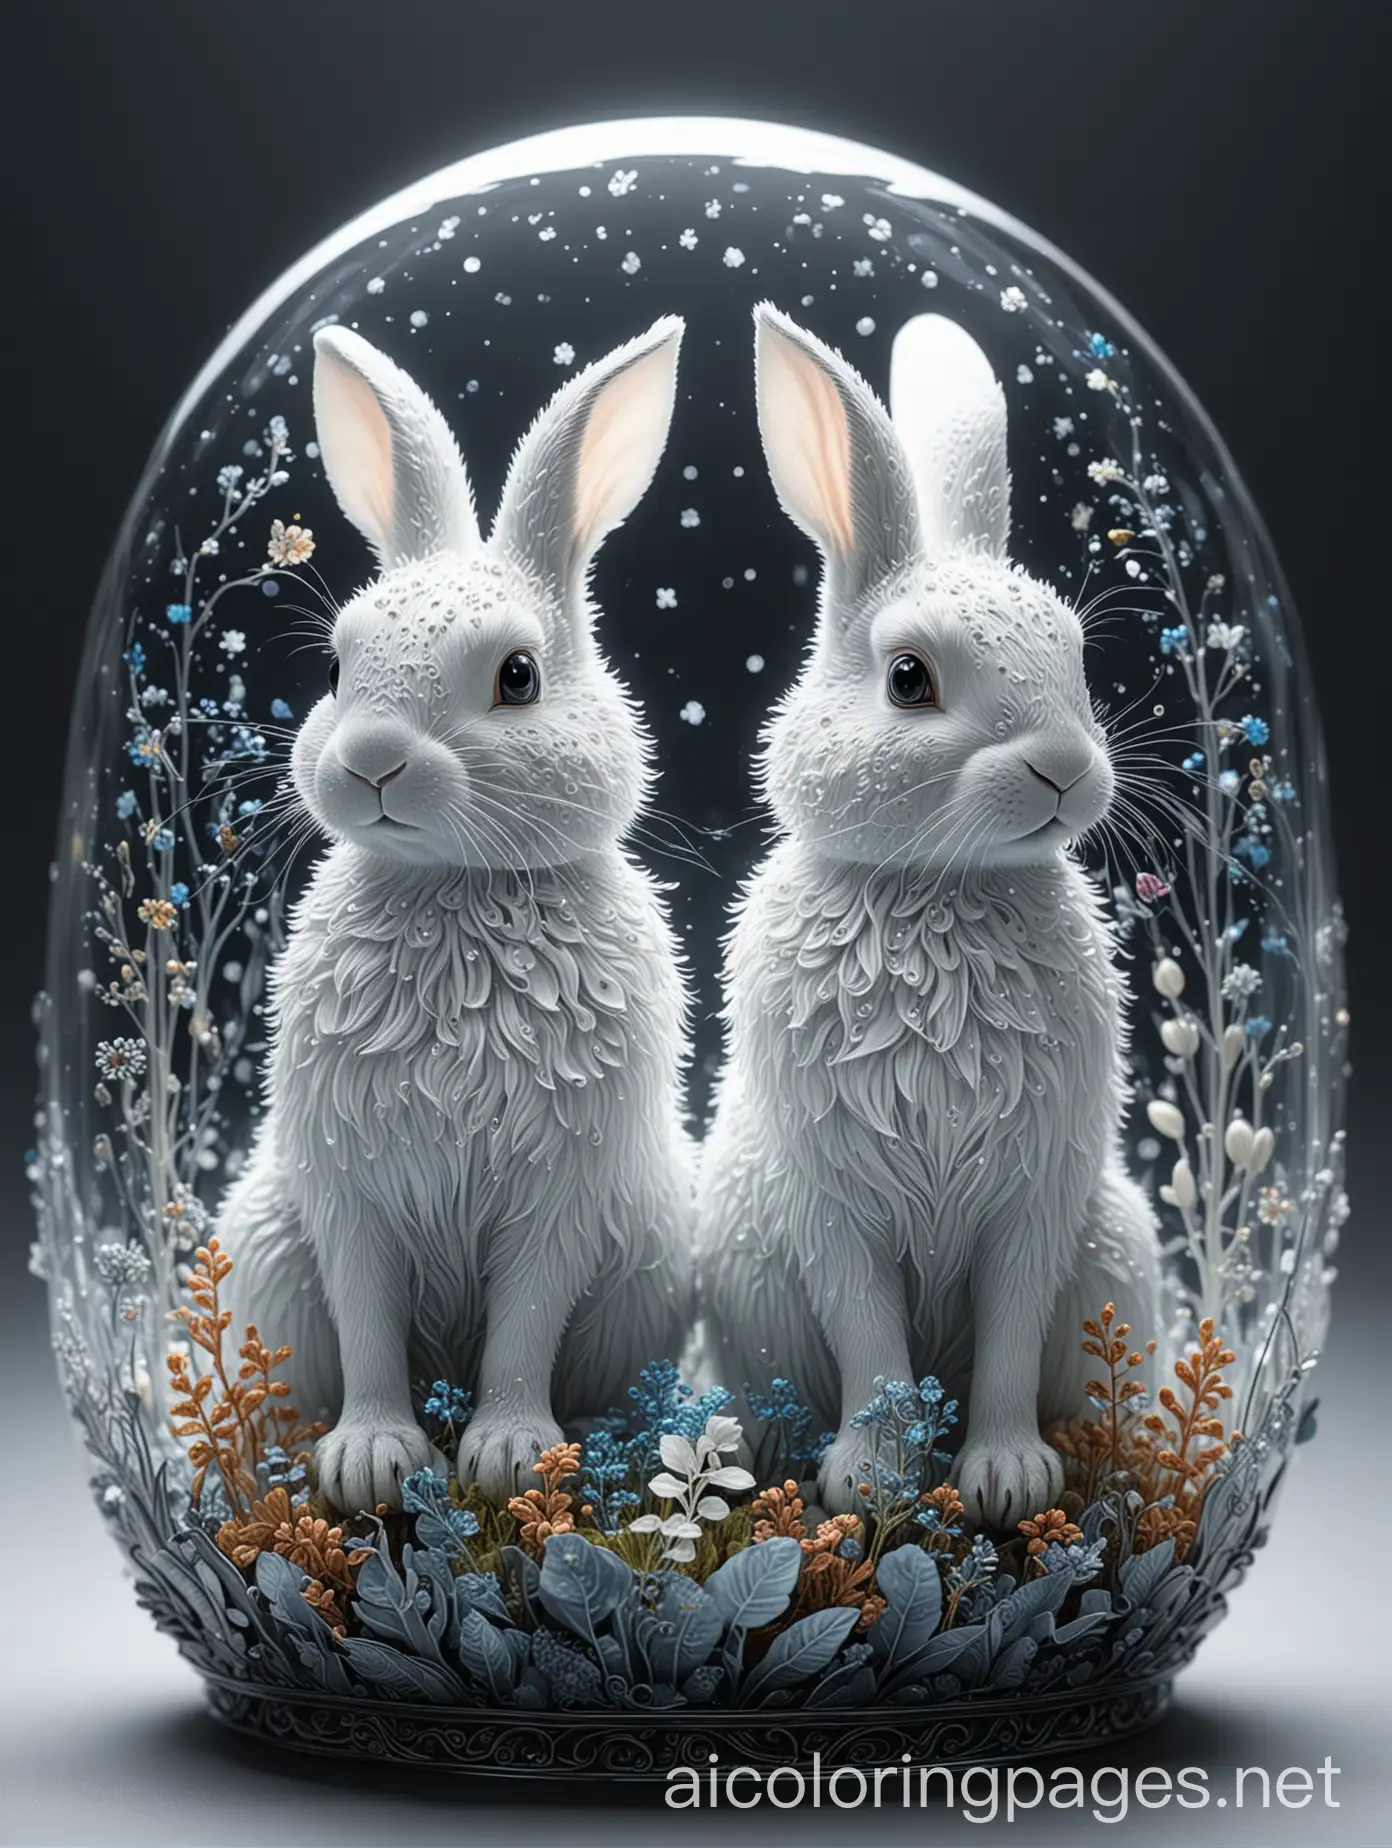  transparent glass rabbits filled with bioluminescent  plants, : luminous, opalescent, Insanely detailed beautiful rabbits  : meticulously detailed filigree  extreme contrast and saturation : starry galactic night sky background : magical fantasy artwork : ultra high quality : dramatic lighting : extreme contrast : rule of thirds : HDR : photorealistic : florescent light, Coloring Page, black and white, line art, white background, Simplicity, Ample White Space. The background of the coloring page is plain white to make it easy for young children to color within the lines. The outlines of all the subjects are easy to distinguish, making it simple for kids to color without too much difficulty